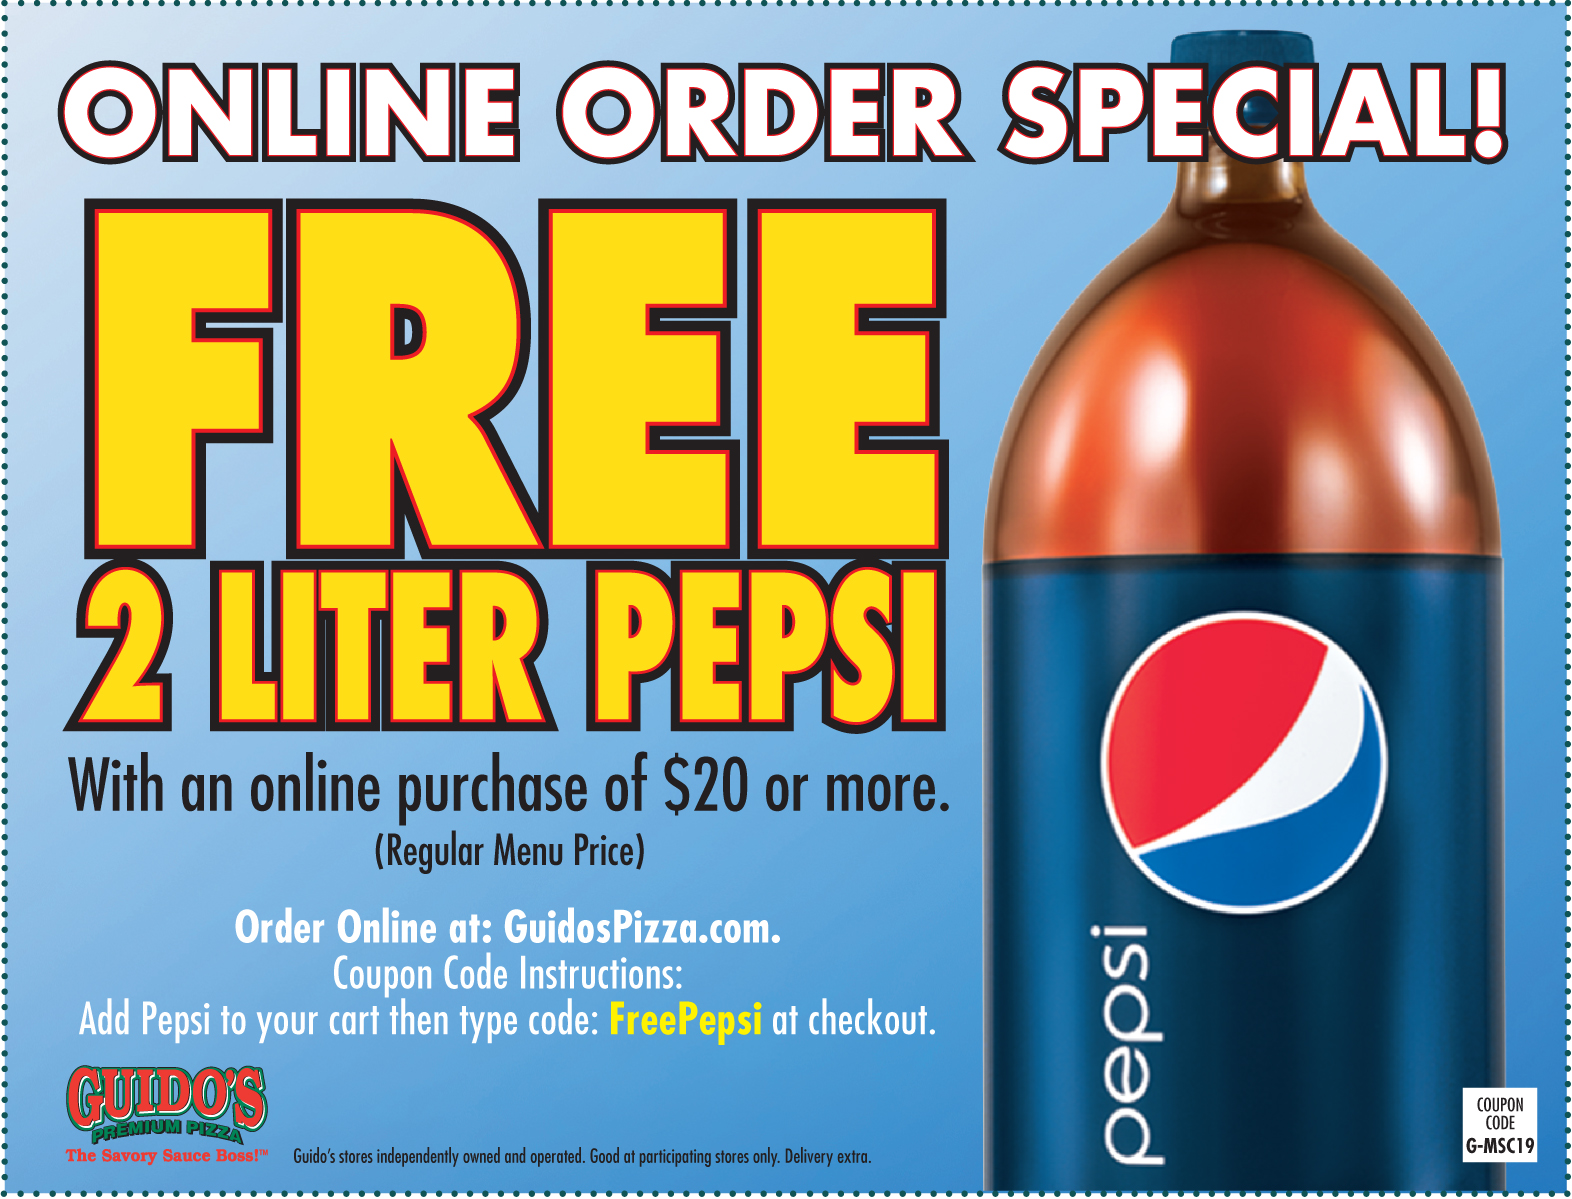 Online Order Special FREE 2 Liter W/Online Purchase of $20 or more